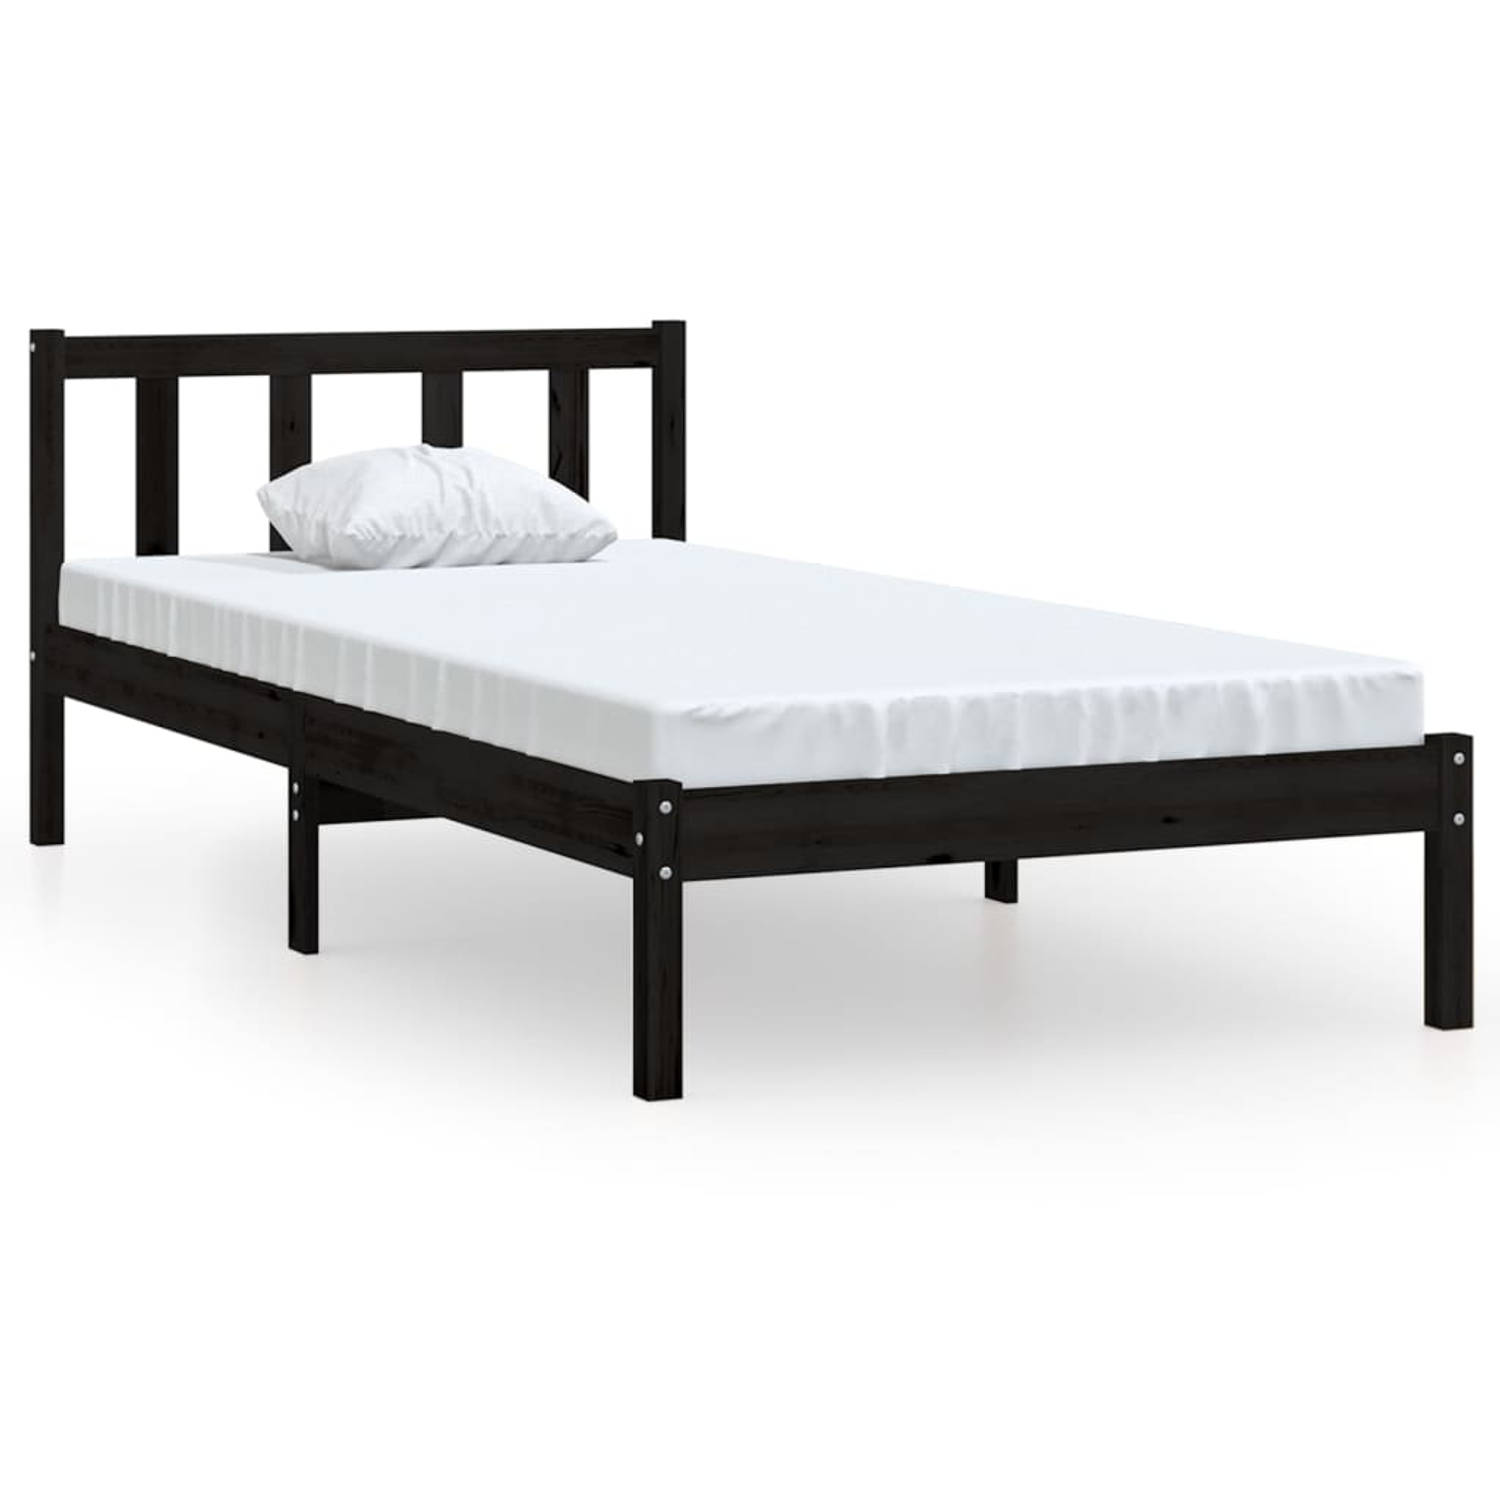 The Living Store Bedframe massief grenenhout zwart 100x200 cm - Bedframe - Bedframe - Bed Frame - Bed Frames - Bed - Bedden - 1-persoonsbed - 1-persoonsbedden - Eenpersoons Bed